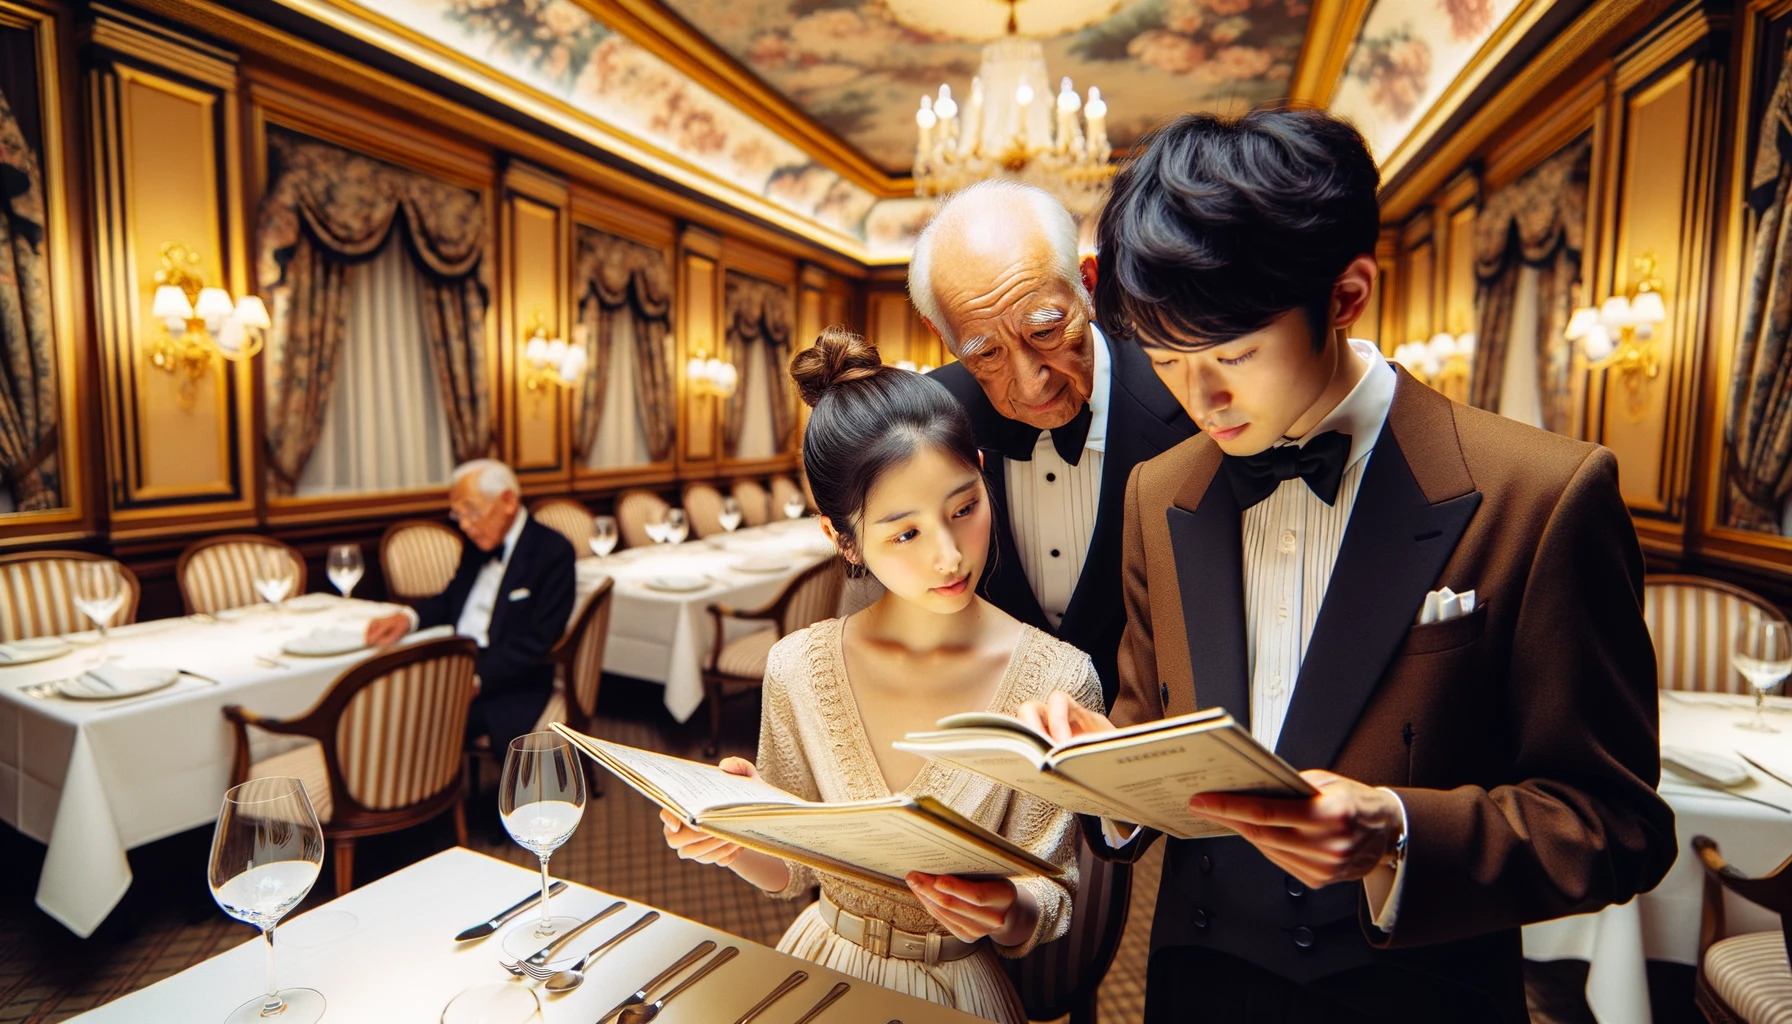 Photo: Inside a Michelin-starred French restaurant with lavish interiors. A young Japanese woman in a classy dress intently reads the menu while a young Japanese man beside her references a dictionary. An elderly waiter in a classic tuxedo stands nearby, patiently watching them with a warm, understanding gaze. The surroundings are quiet with no other customers present. The overall ambiance is warm and inviting.